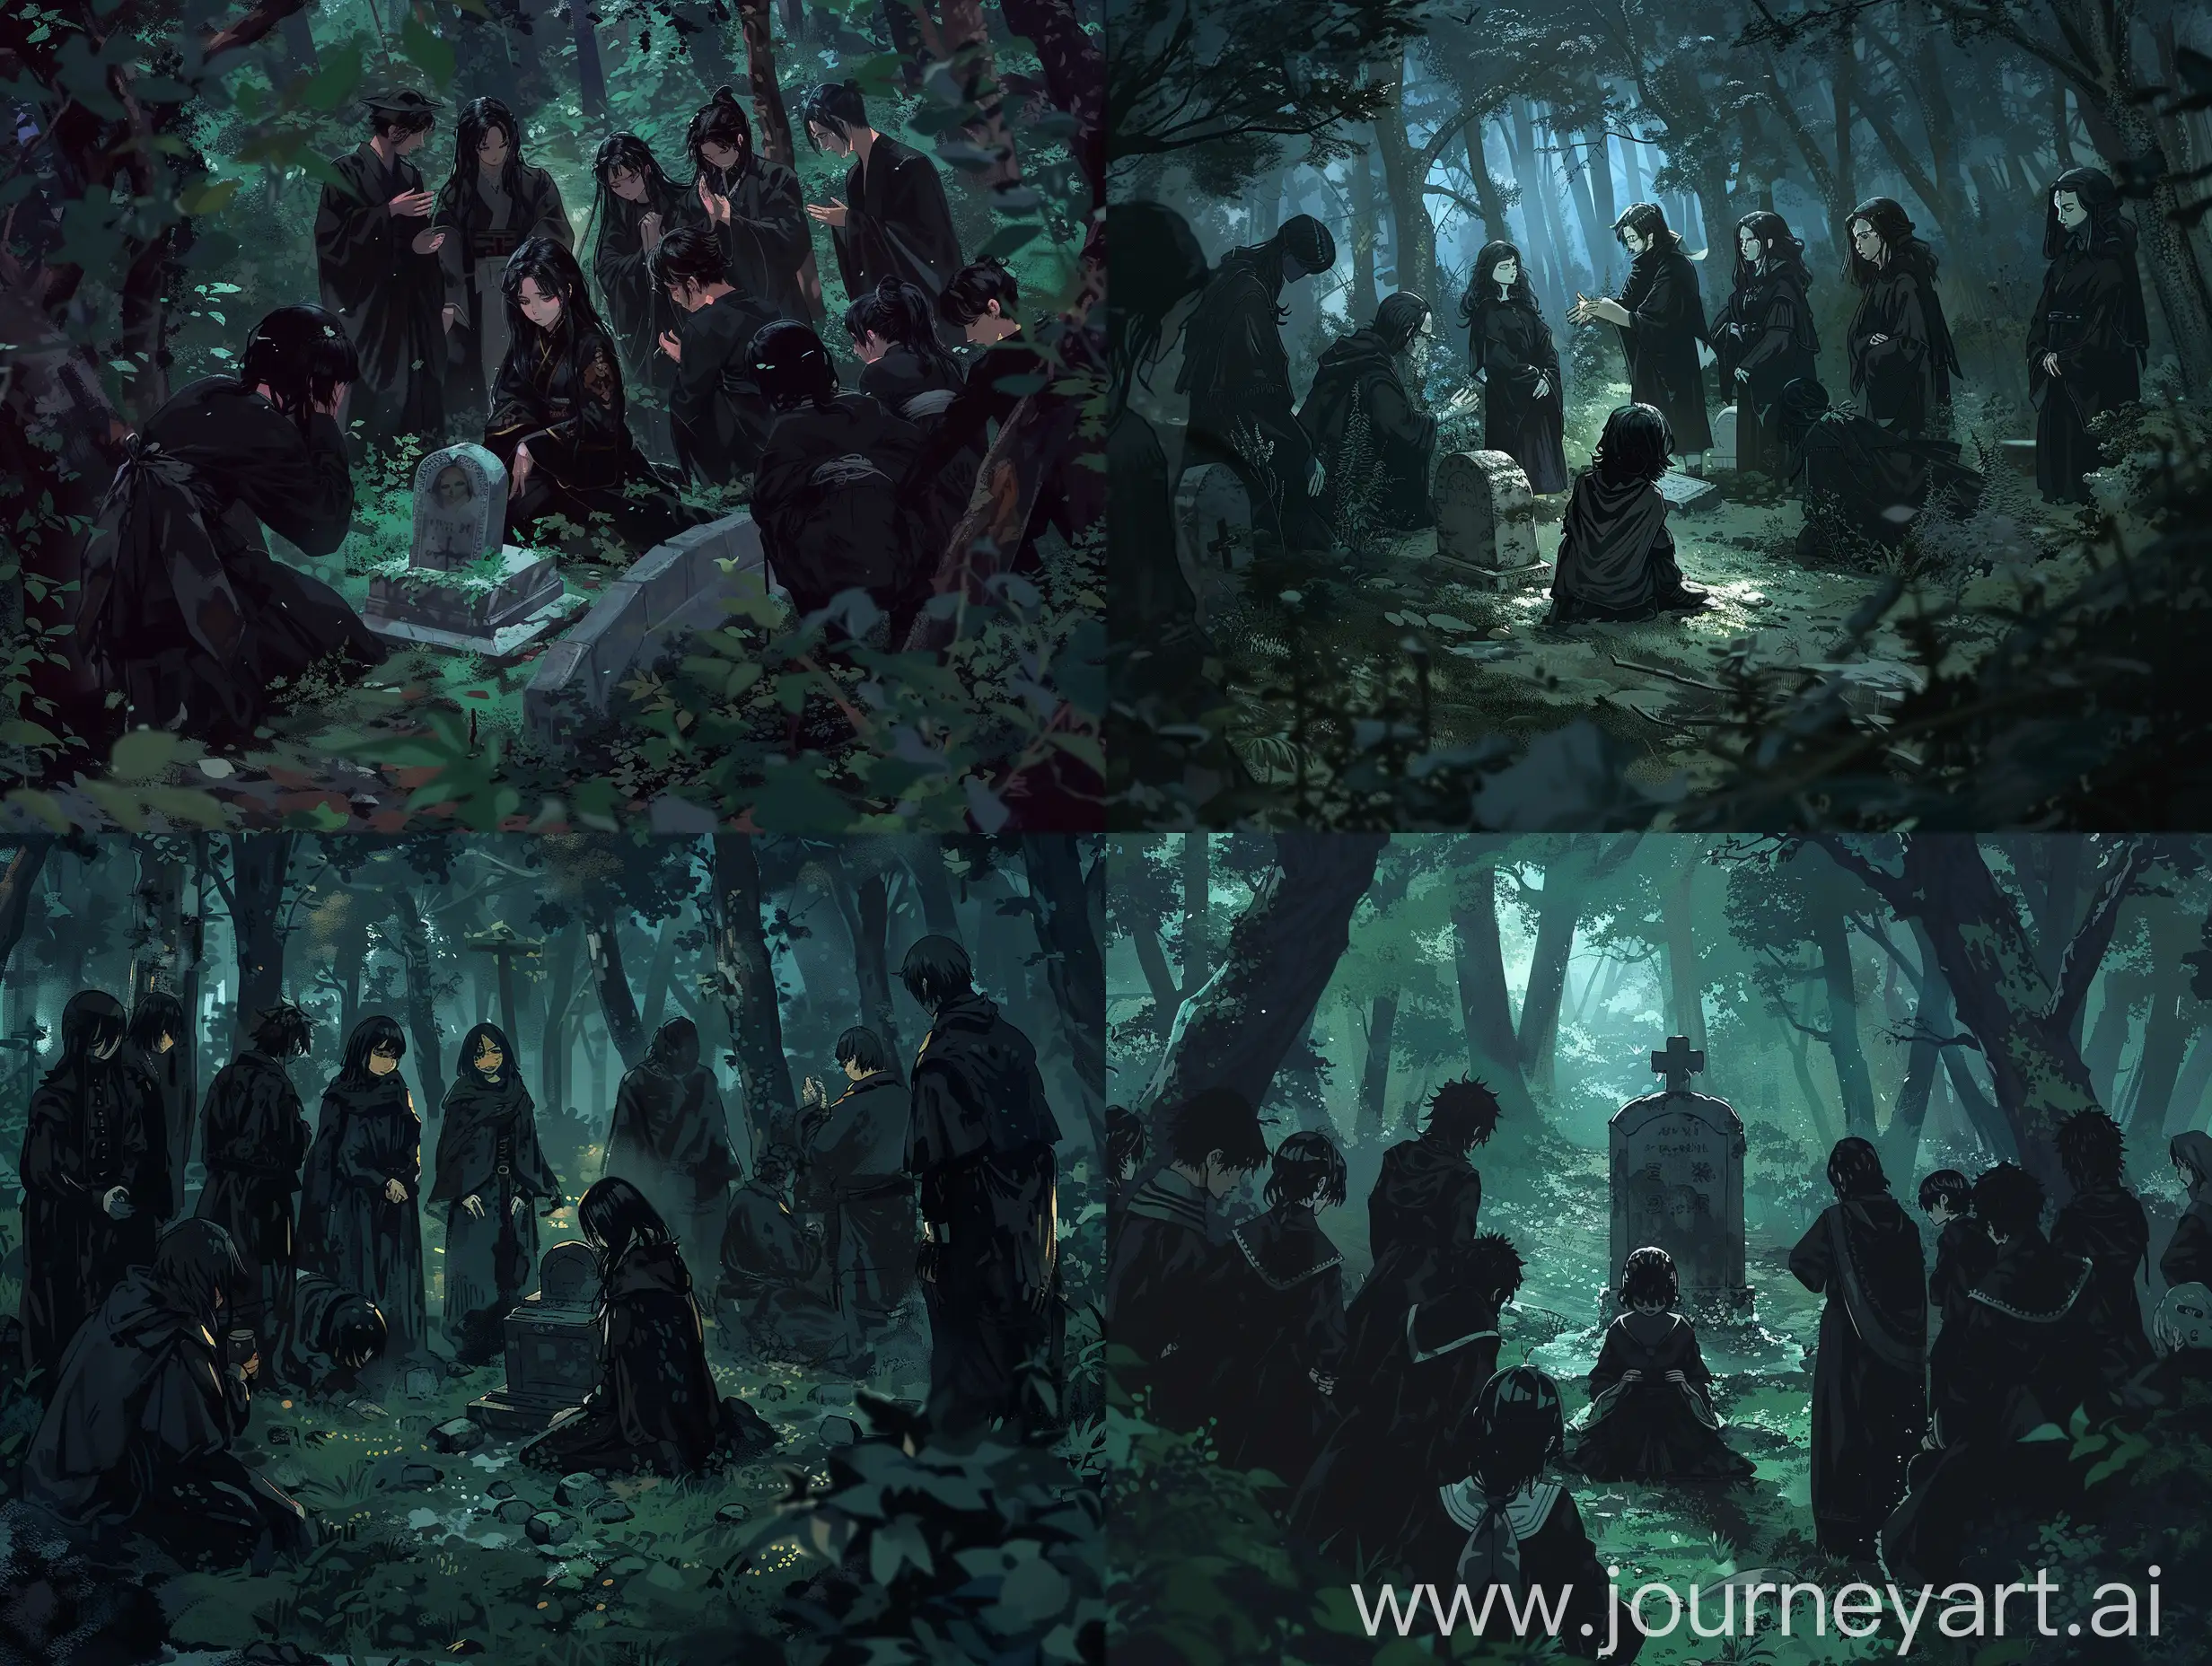 Mysterious-Ritual-in-the-Enchanted-Forest